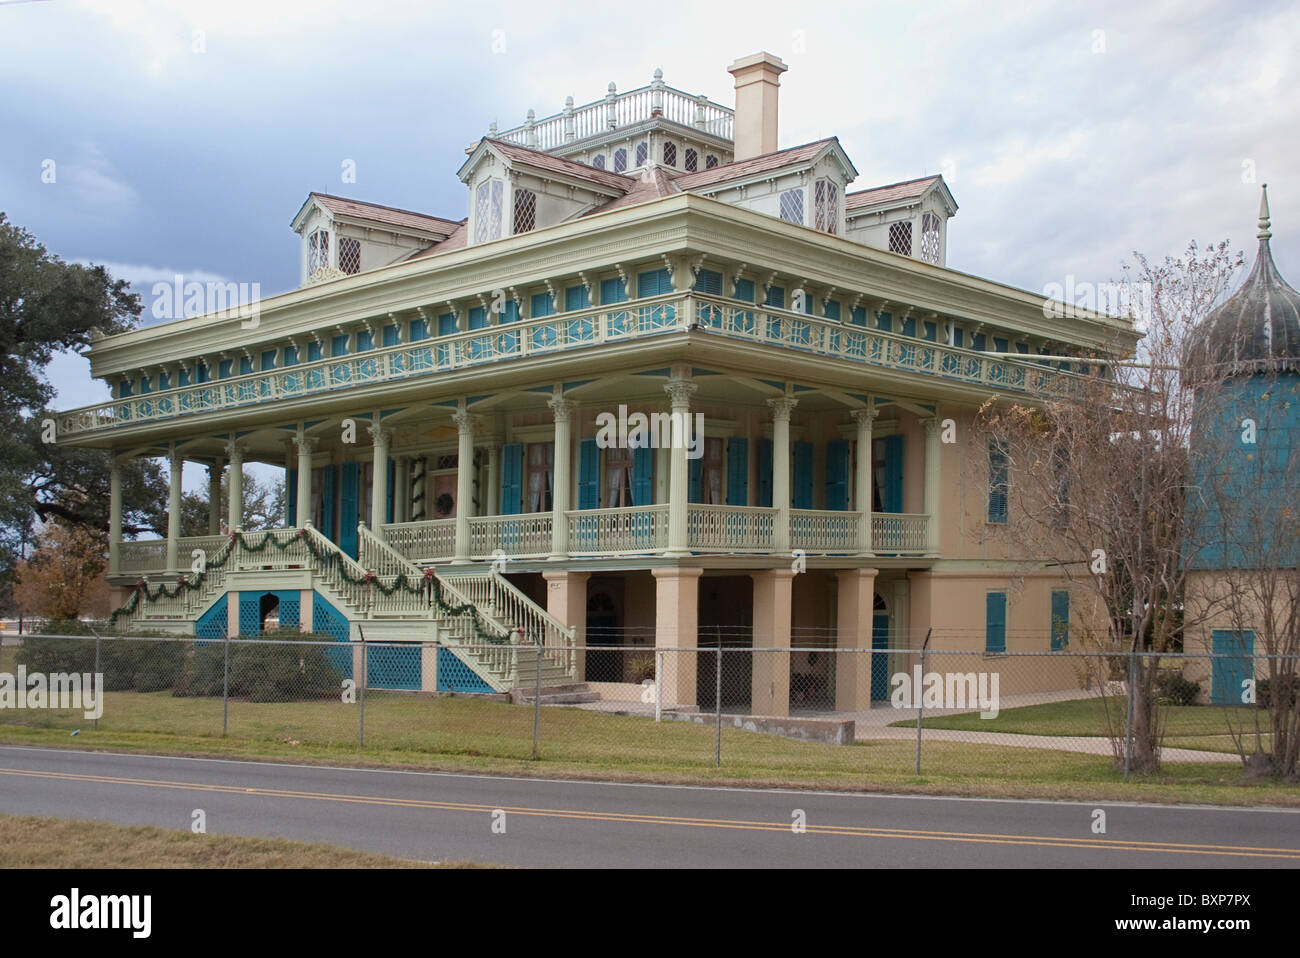 Planters House On The Mississippi River At New Orleans Louisiana